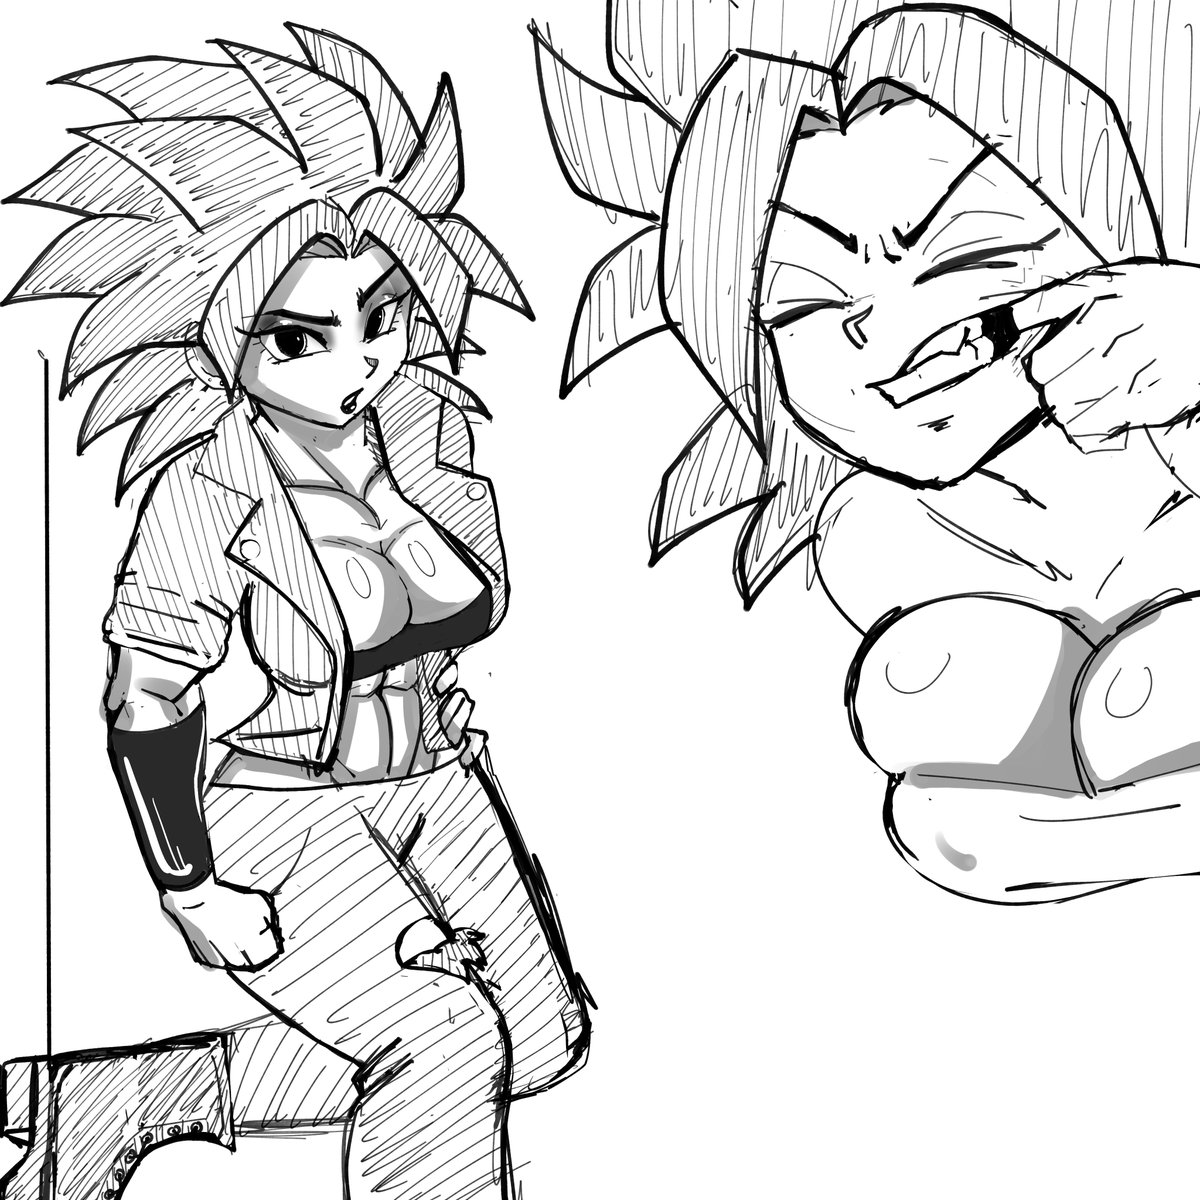 caulifla sketches from this morning so i could loosen up.